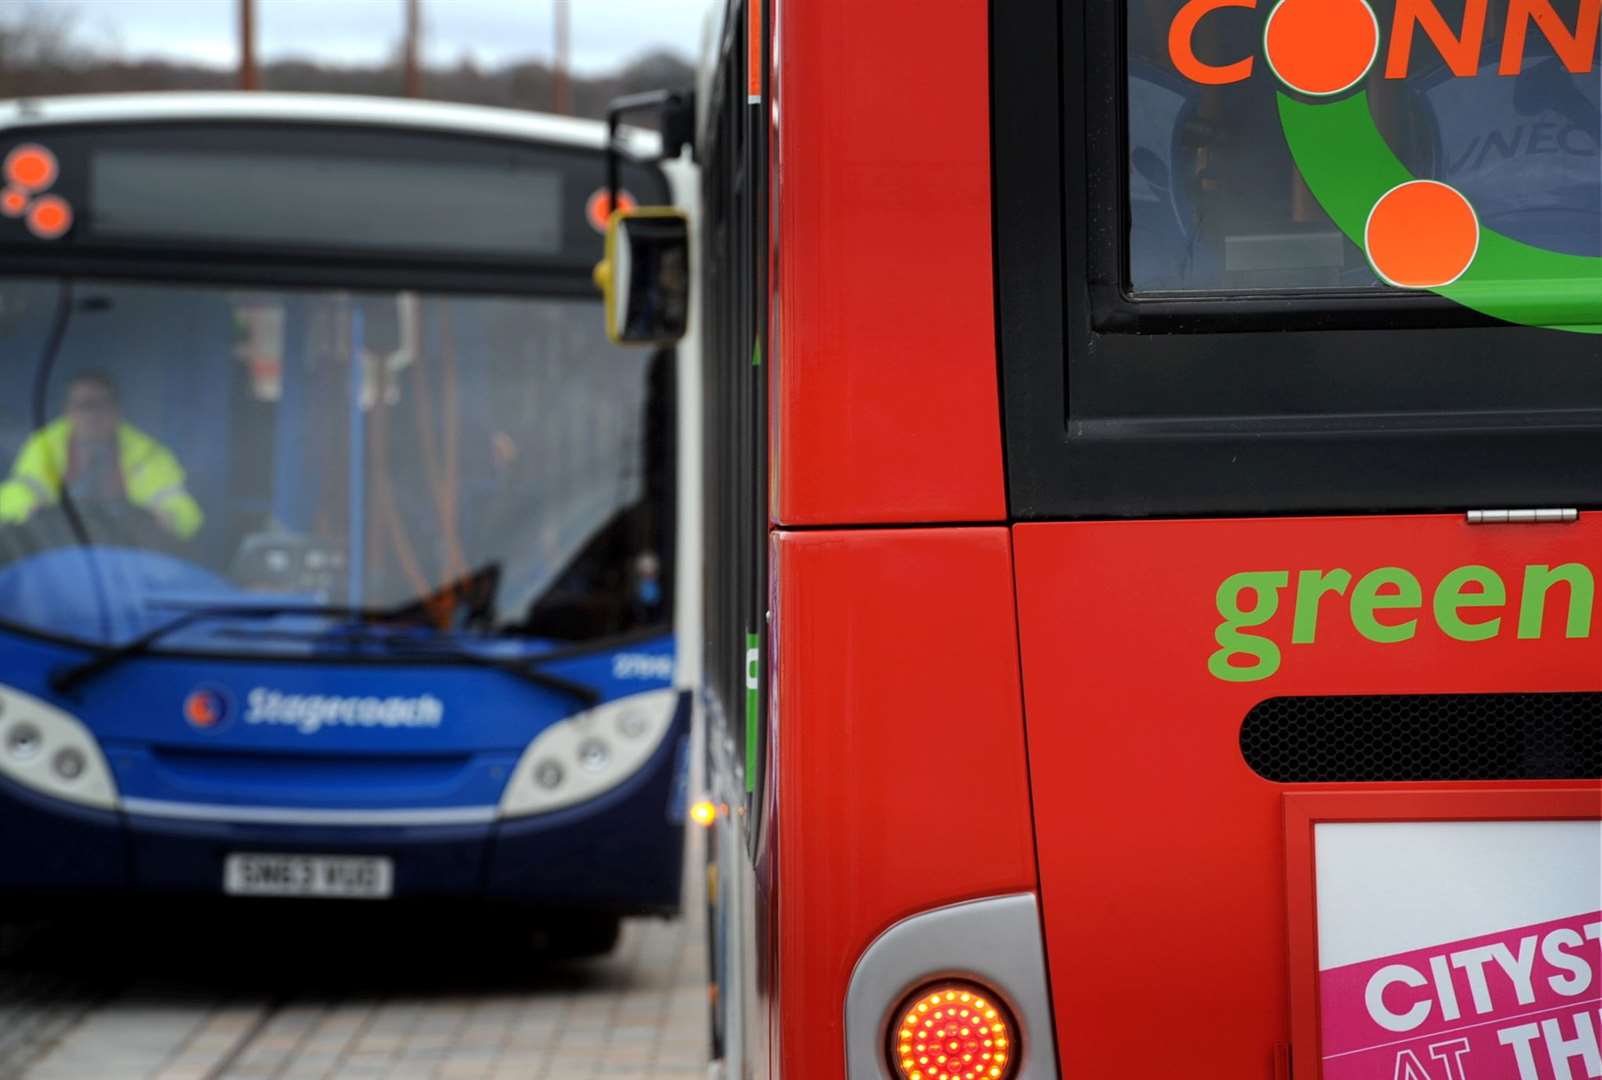 A survey is underway to learn about bus use by those aged 22 and under.